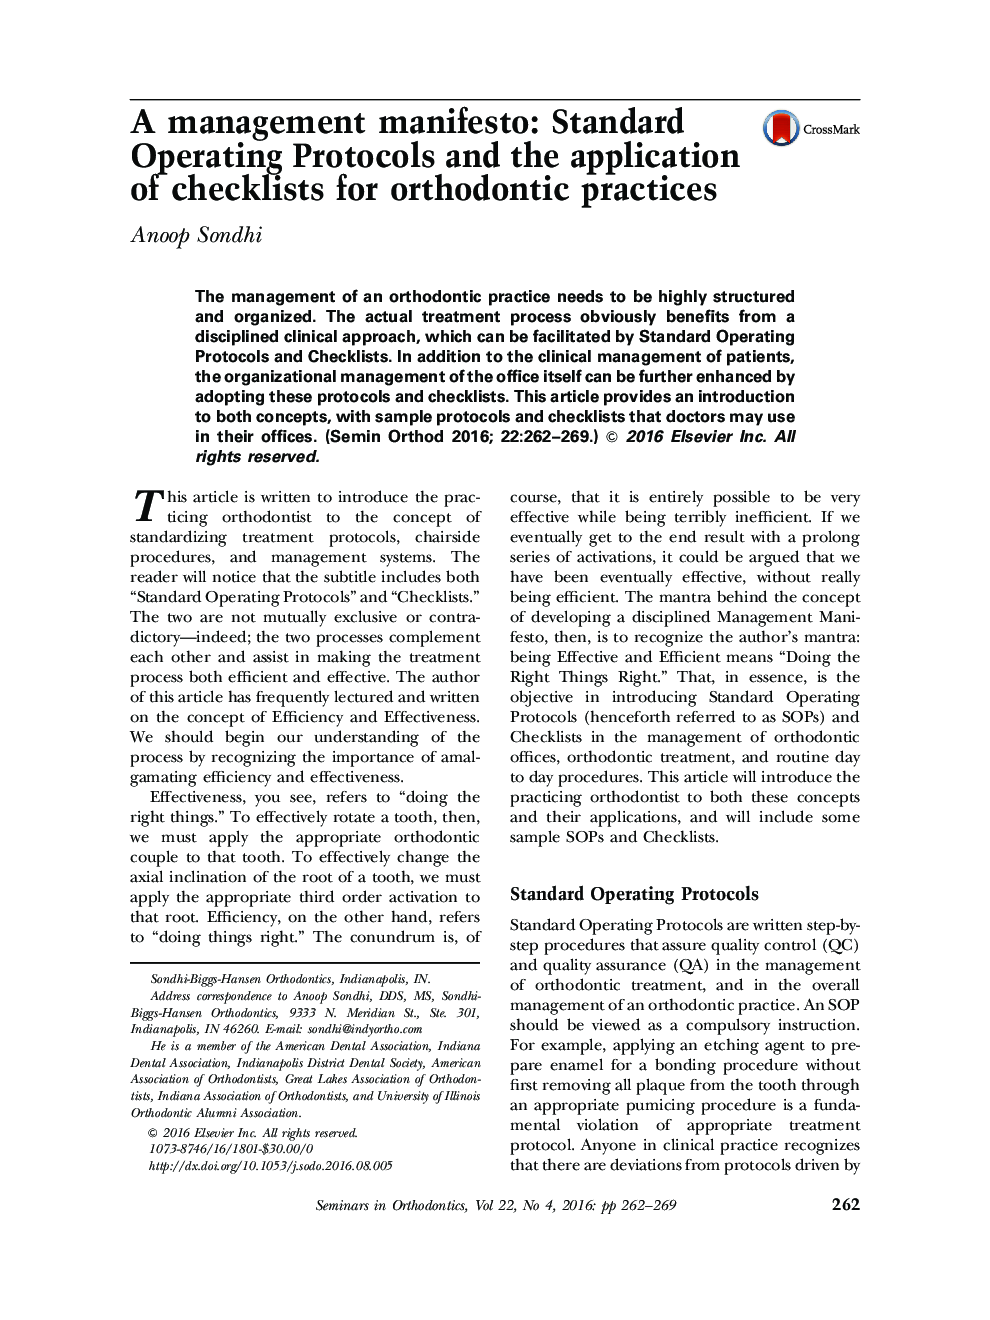 A management manifesto: Standard Operating Protocols and the application of checklists for orthodontic practices